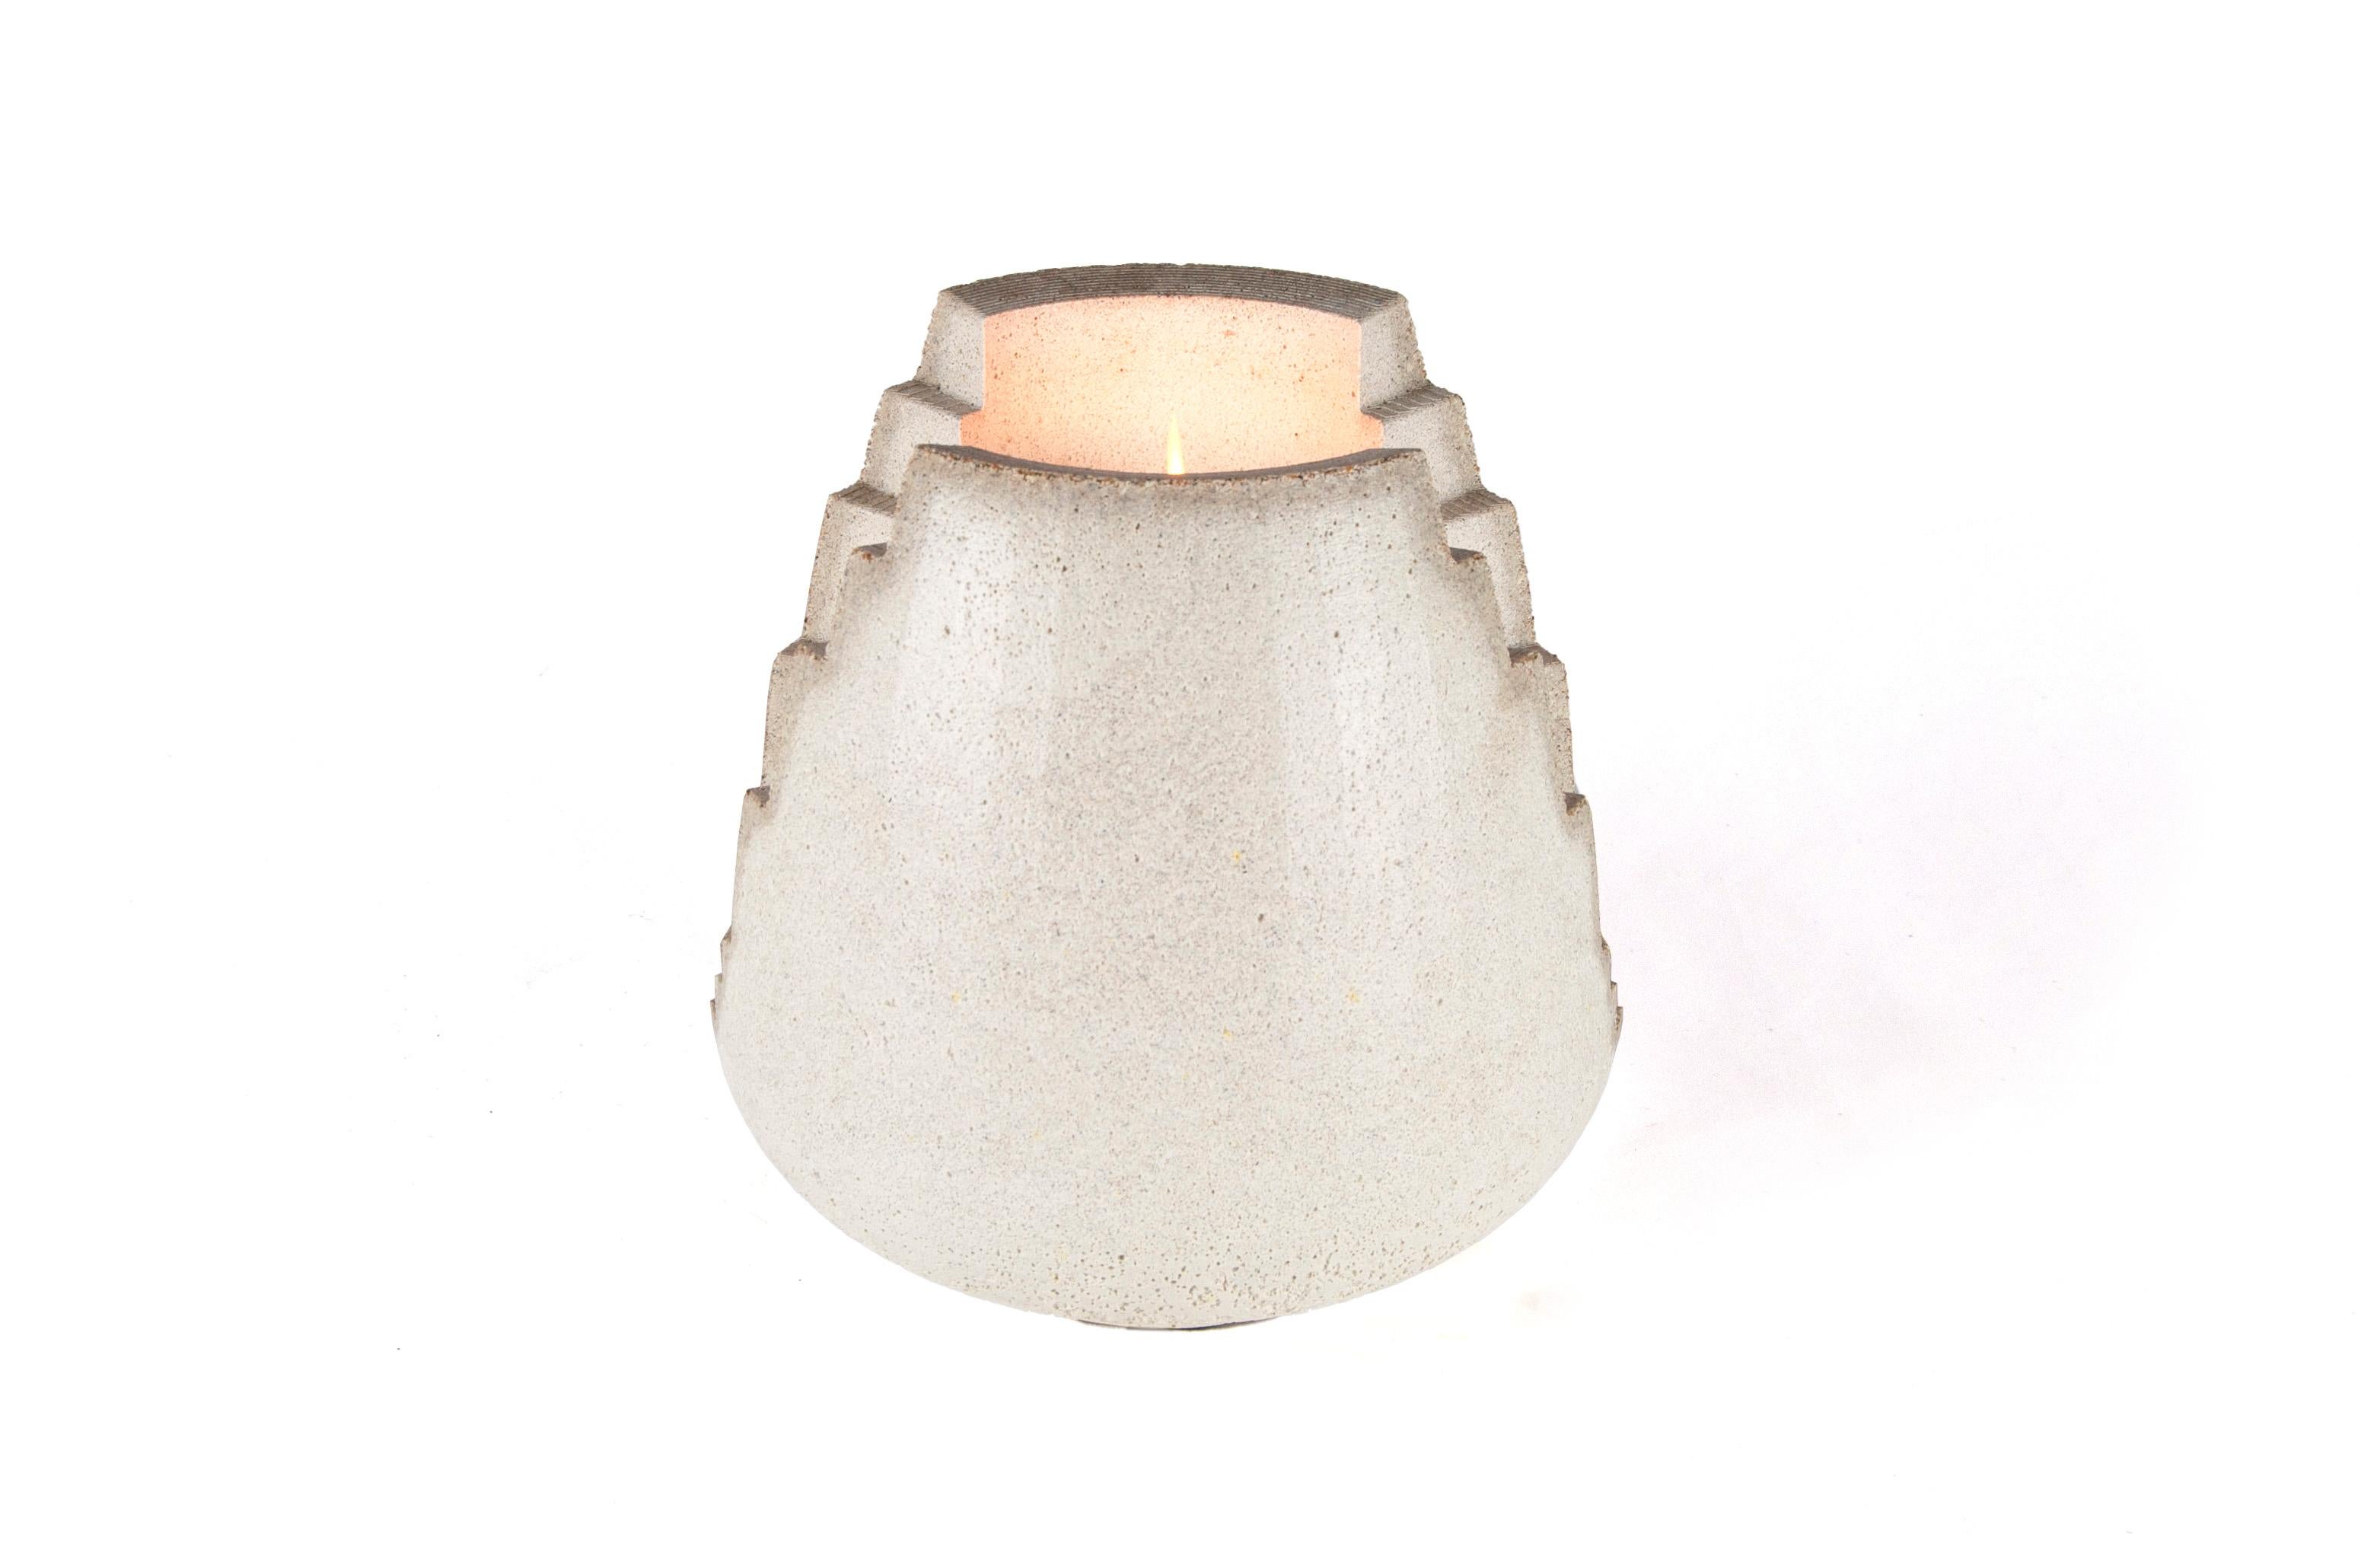 Brutalist Concrete Candle Lantern, White In New Condition For Sale In Camp Meeker, CA